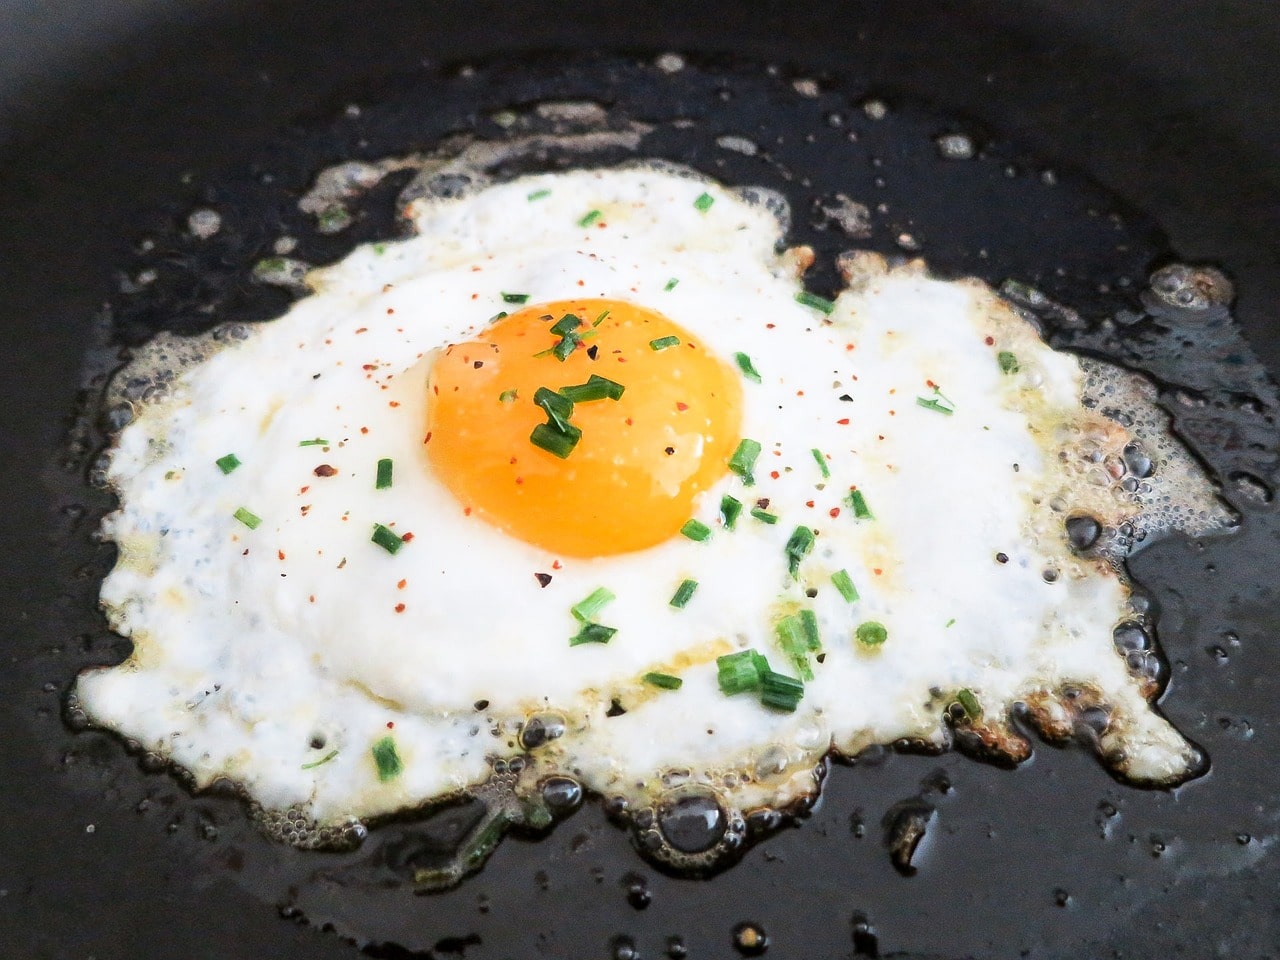 The perfect fried egg? A runny white and a runny yolk